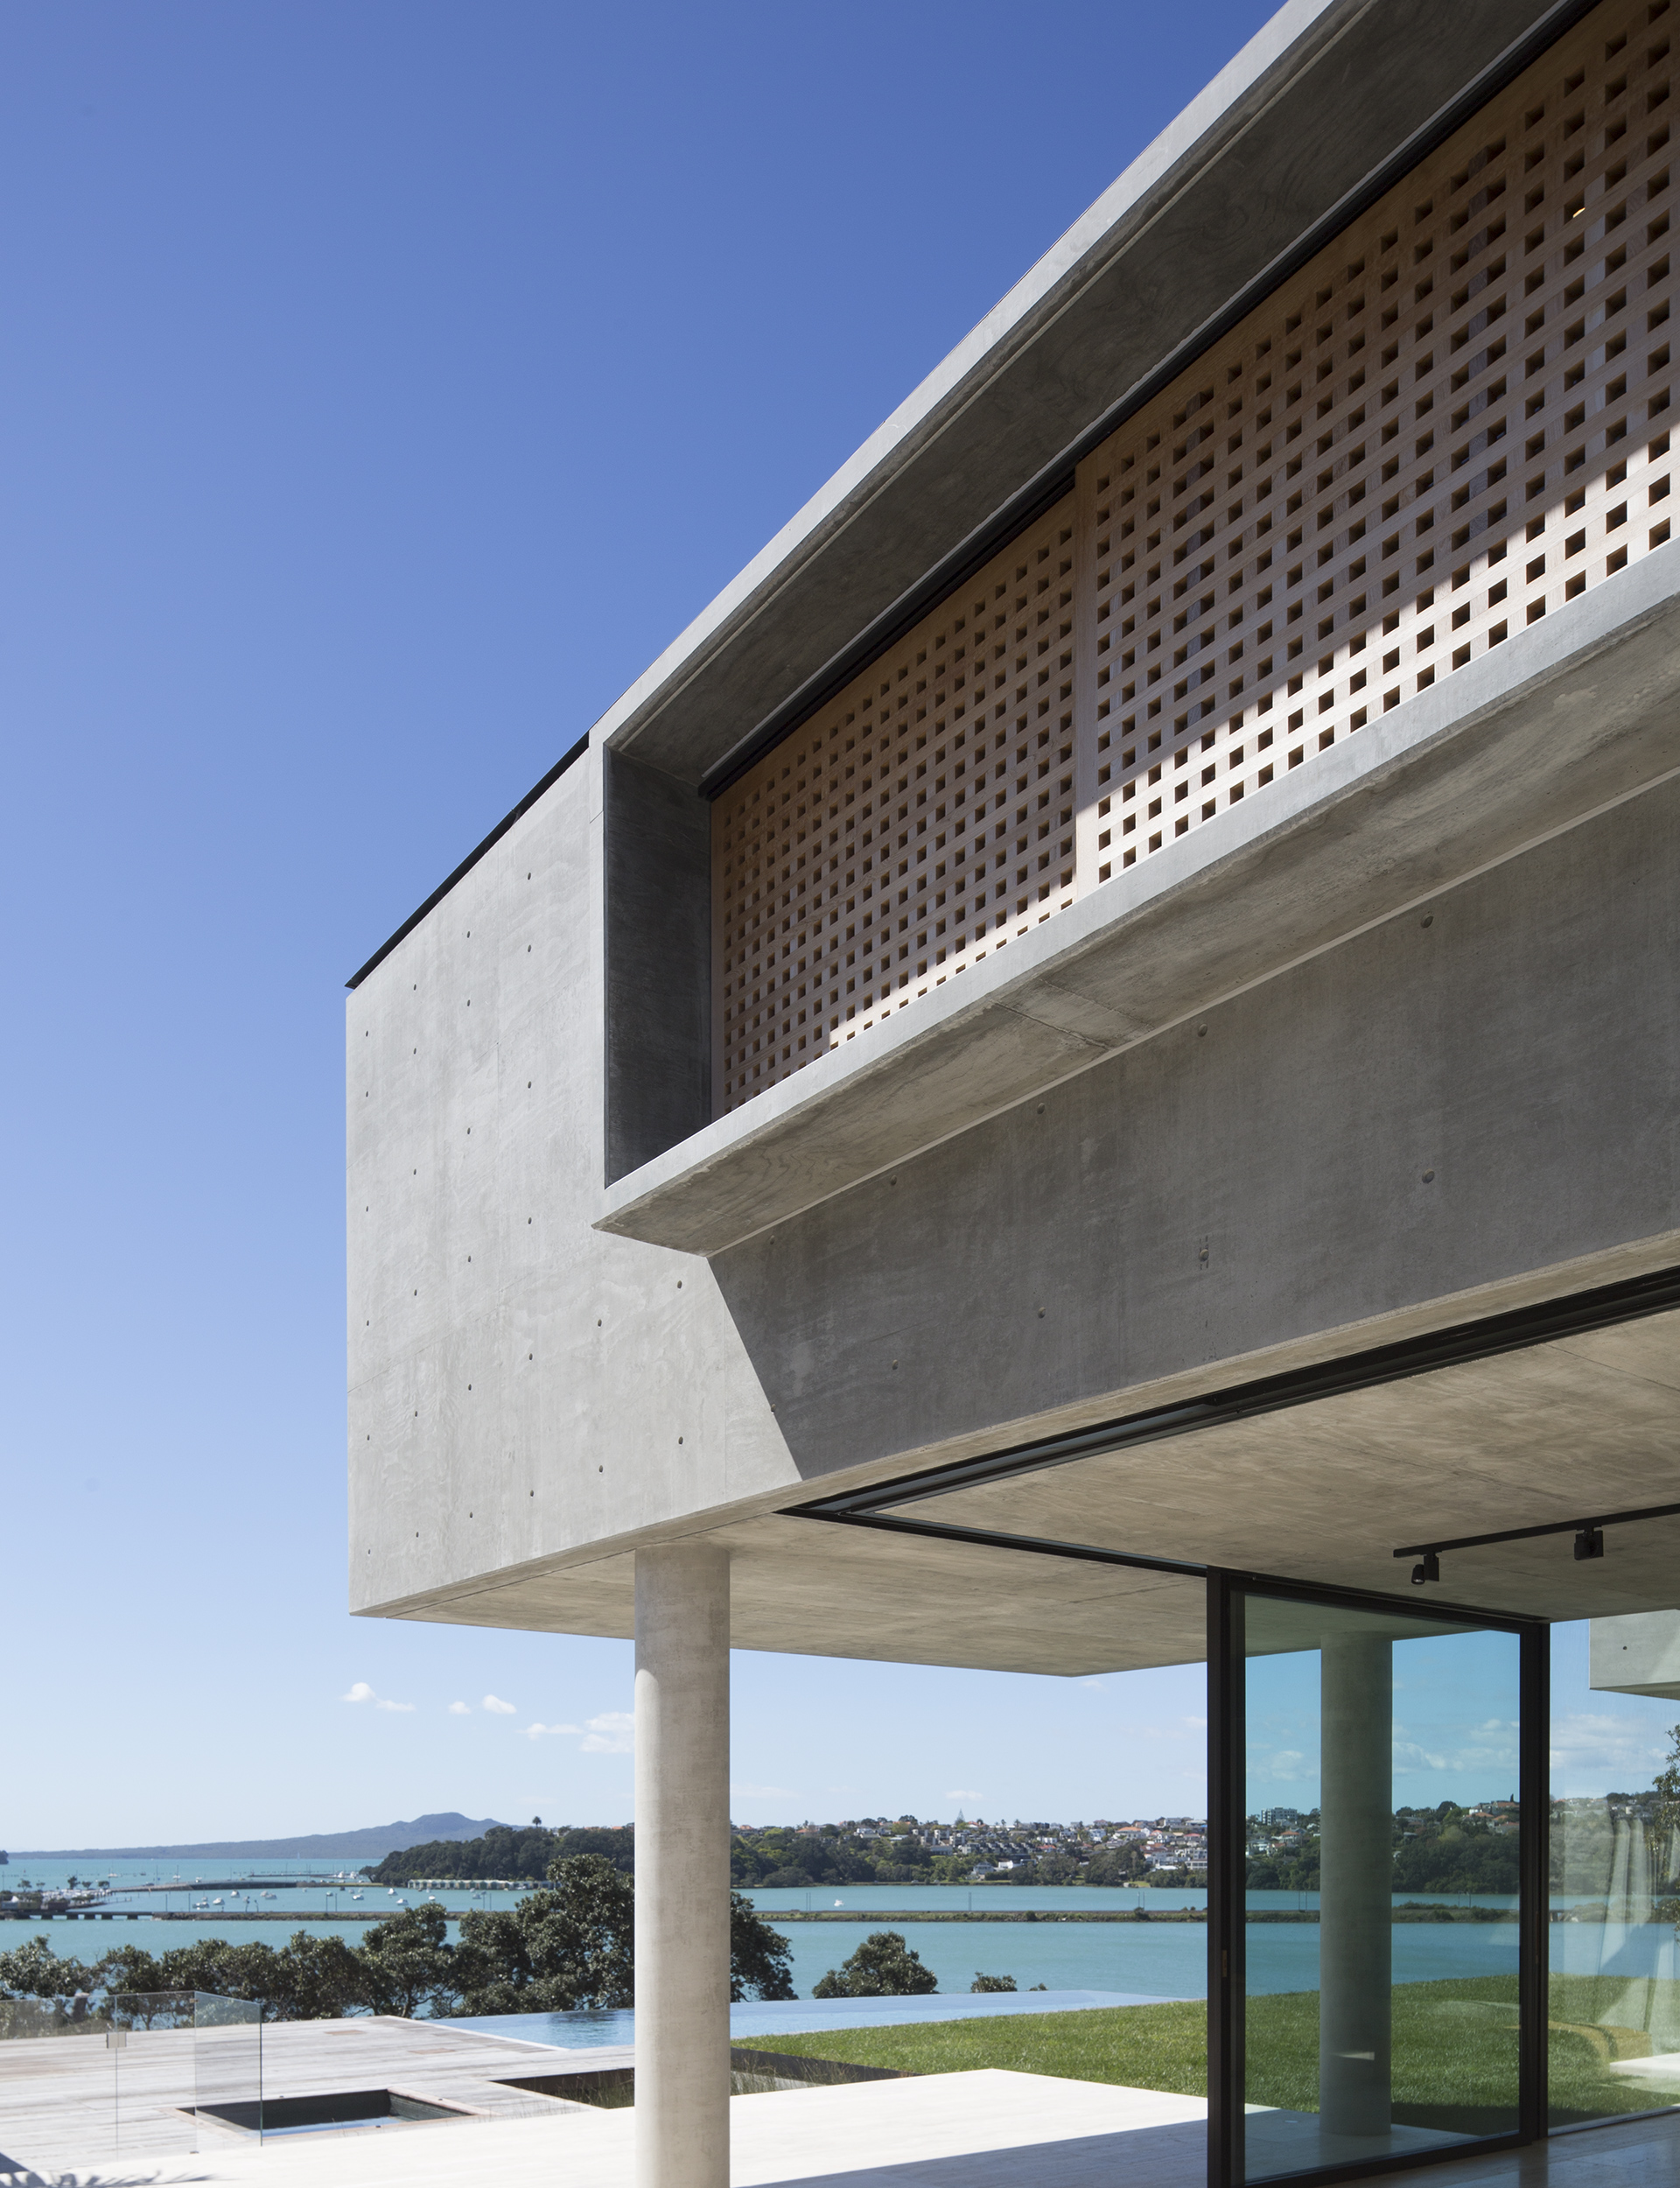 The flow of the living areas from indoors to outdoors is enhanced by glass sliders that maximise the views across Hobson Bay to Devonport, Rangitoto, and east to the Orakei boatsheds that line the water’s edge.